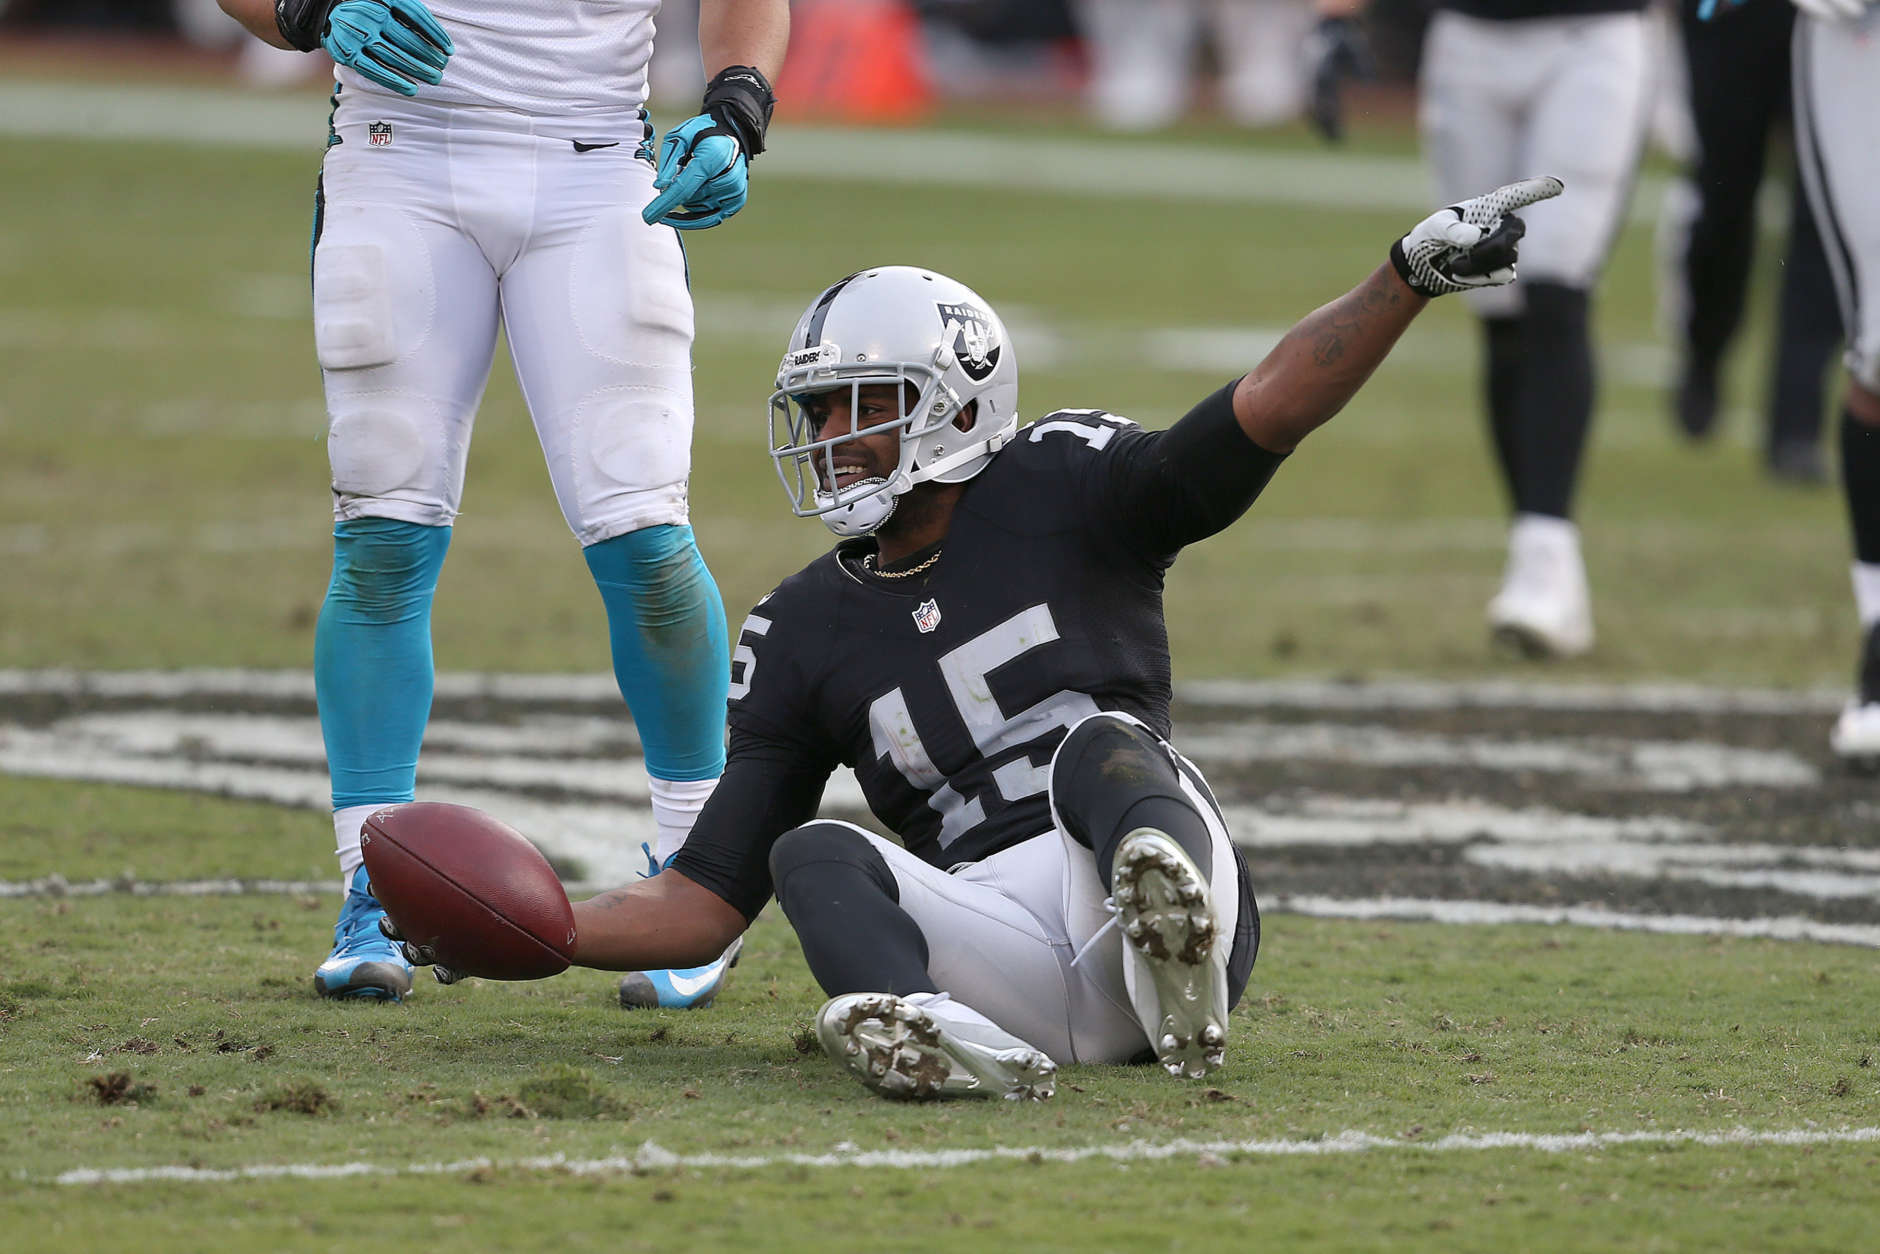 Oakland Raiders wide receiver Michael Crabtree signals a first down during action against the Carolina Panthers during an NFL football game Sunday, Nov. 27, 2016, in Oakland, CA. The Raiders won 35-32. (Daniel Gluskoter/AP Images for Panini)